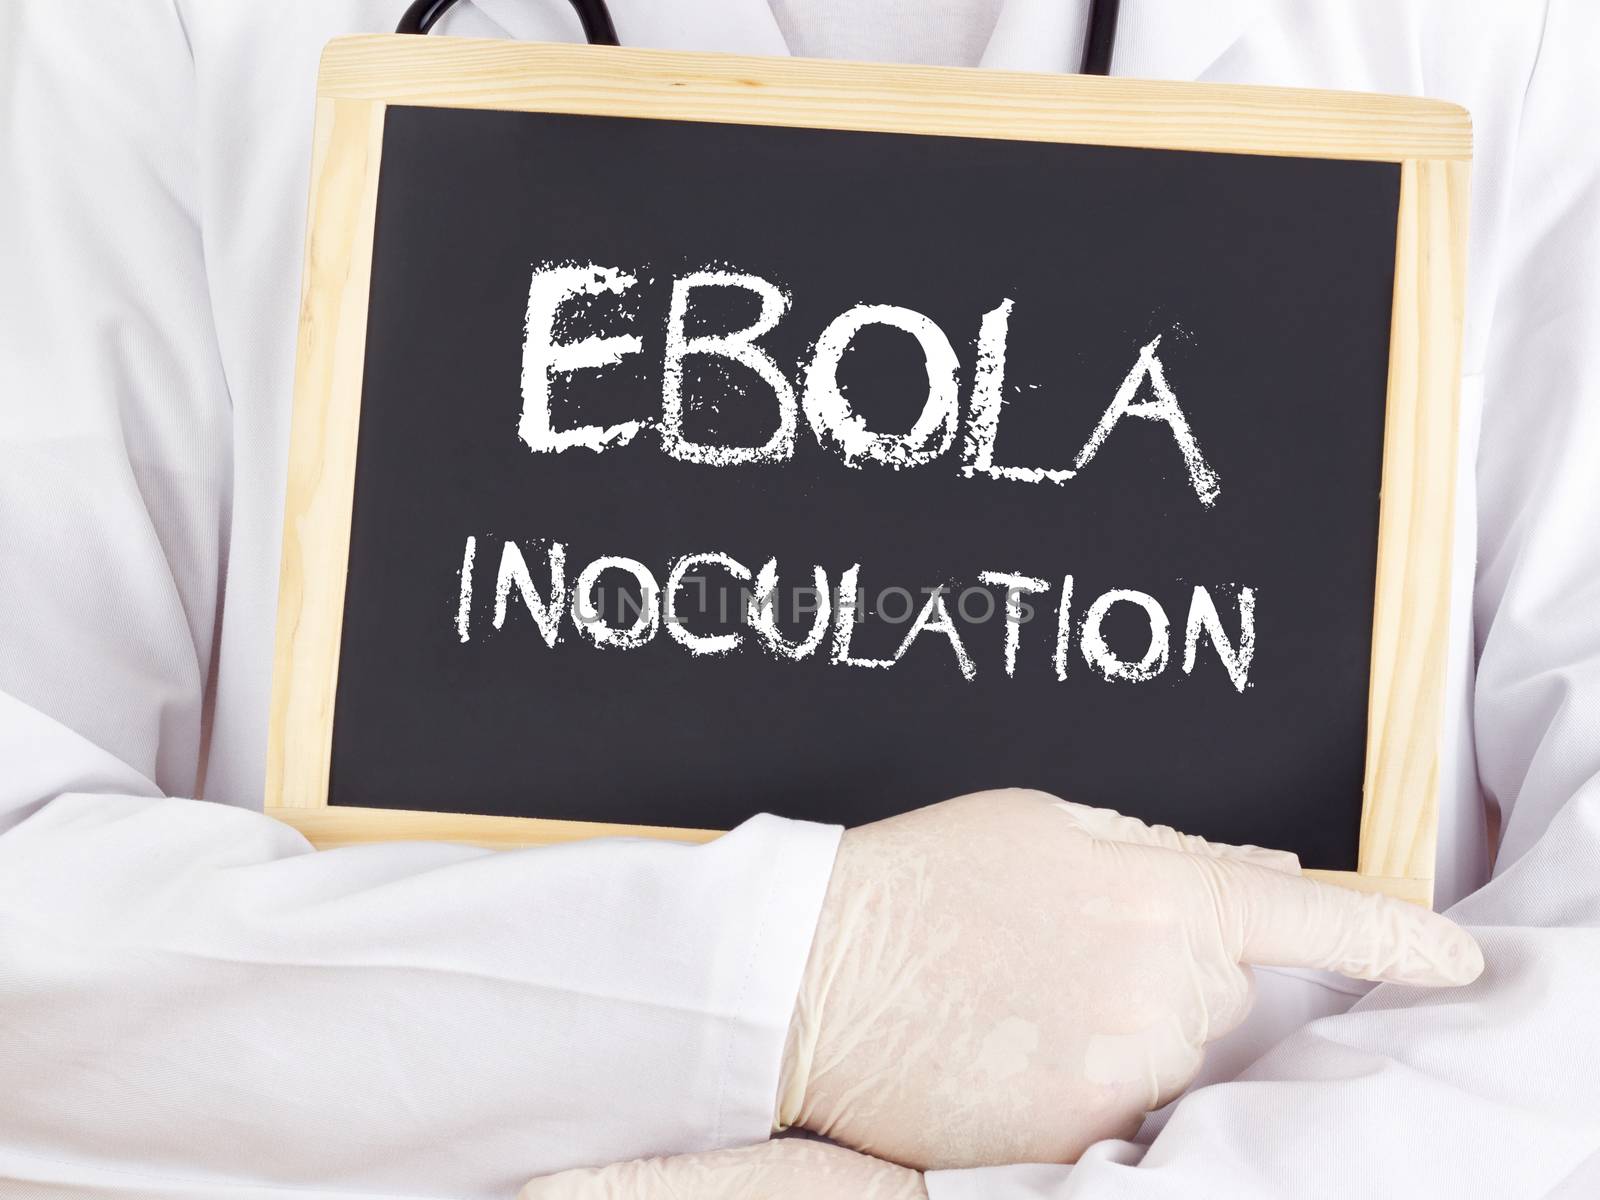 Doctor shows information: Ebola inoculation by gwolters